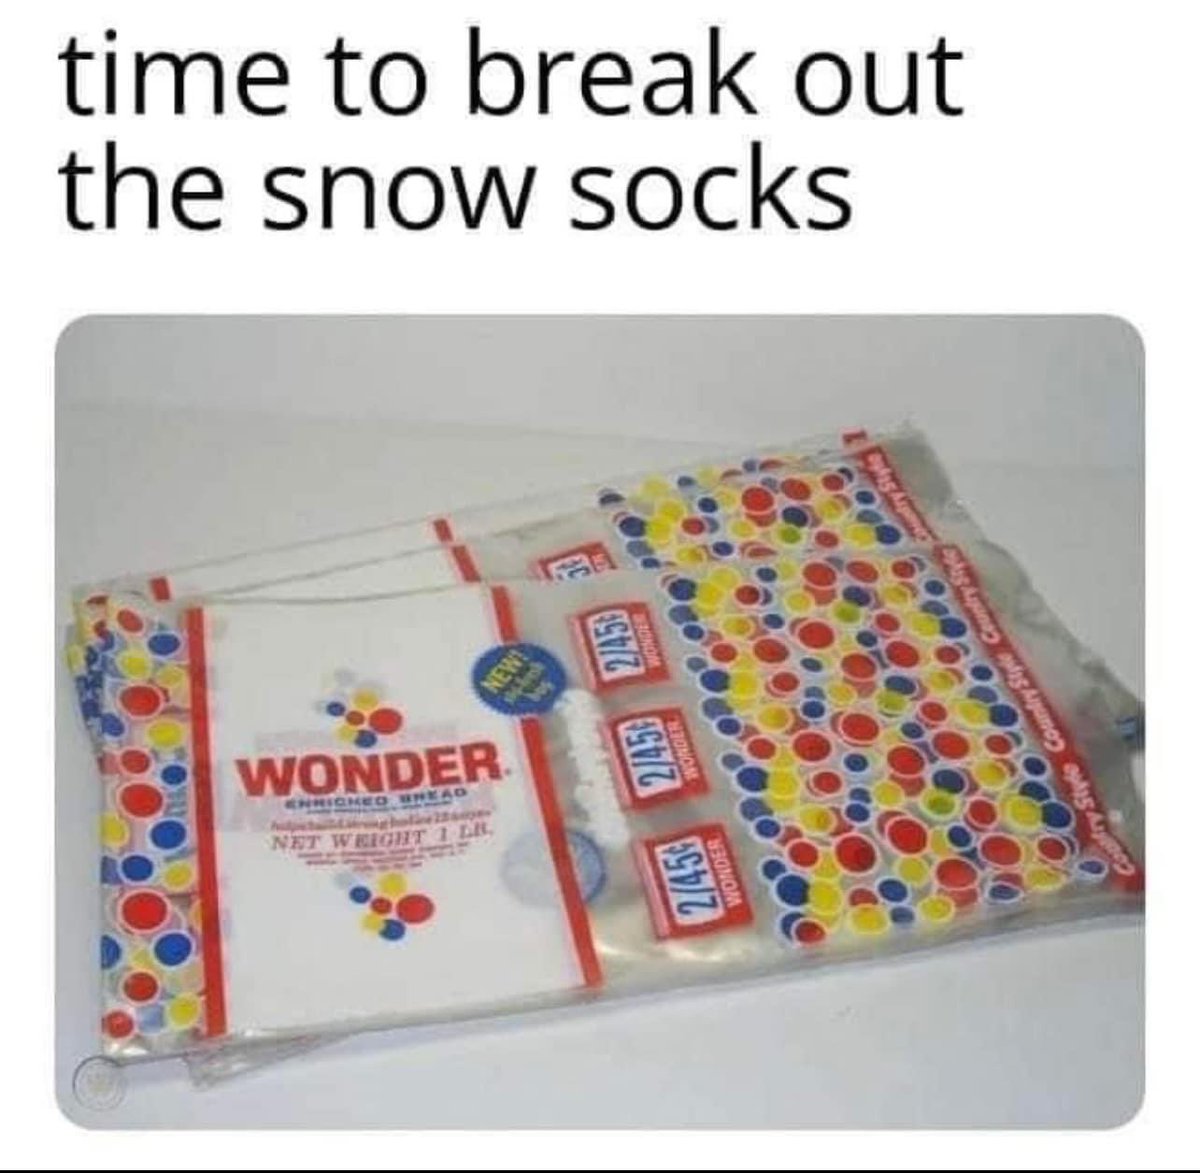 You know you wore these…..
#snowsocks #breadbags